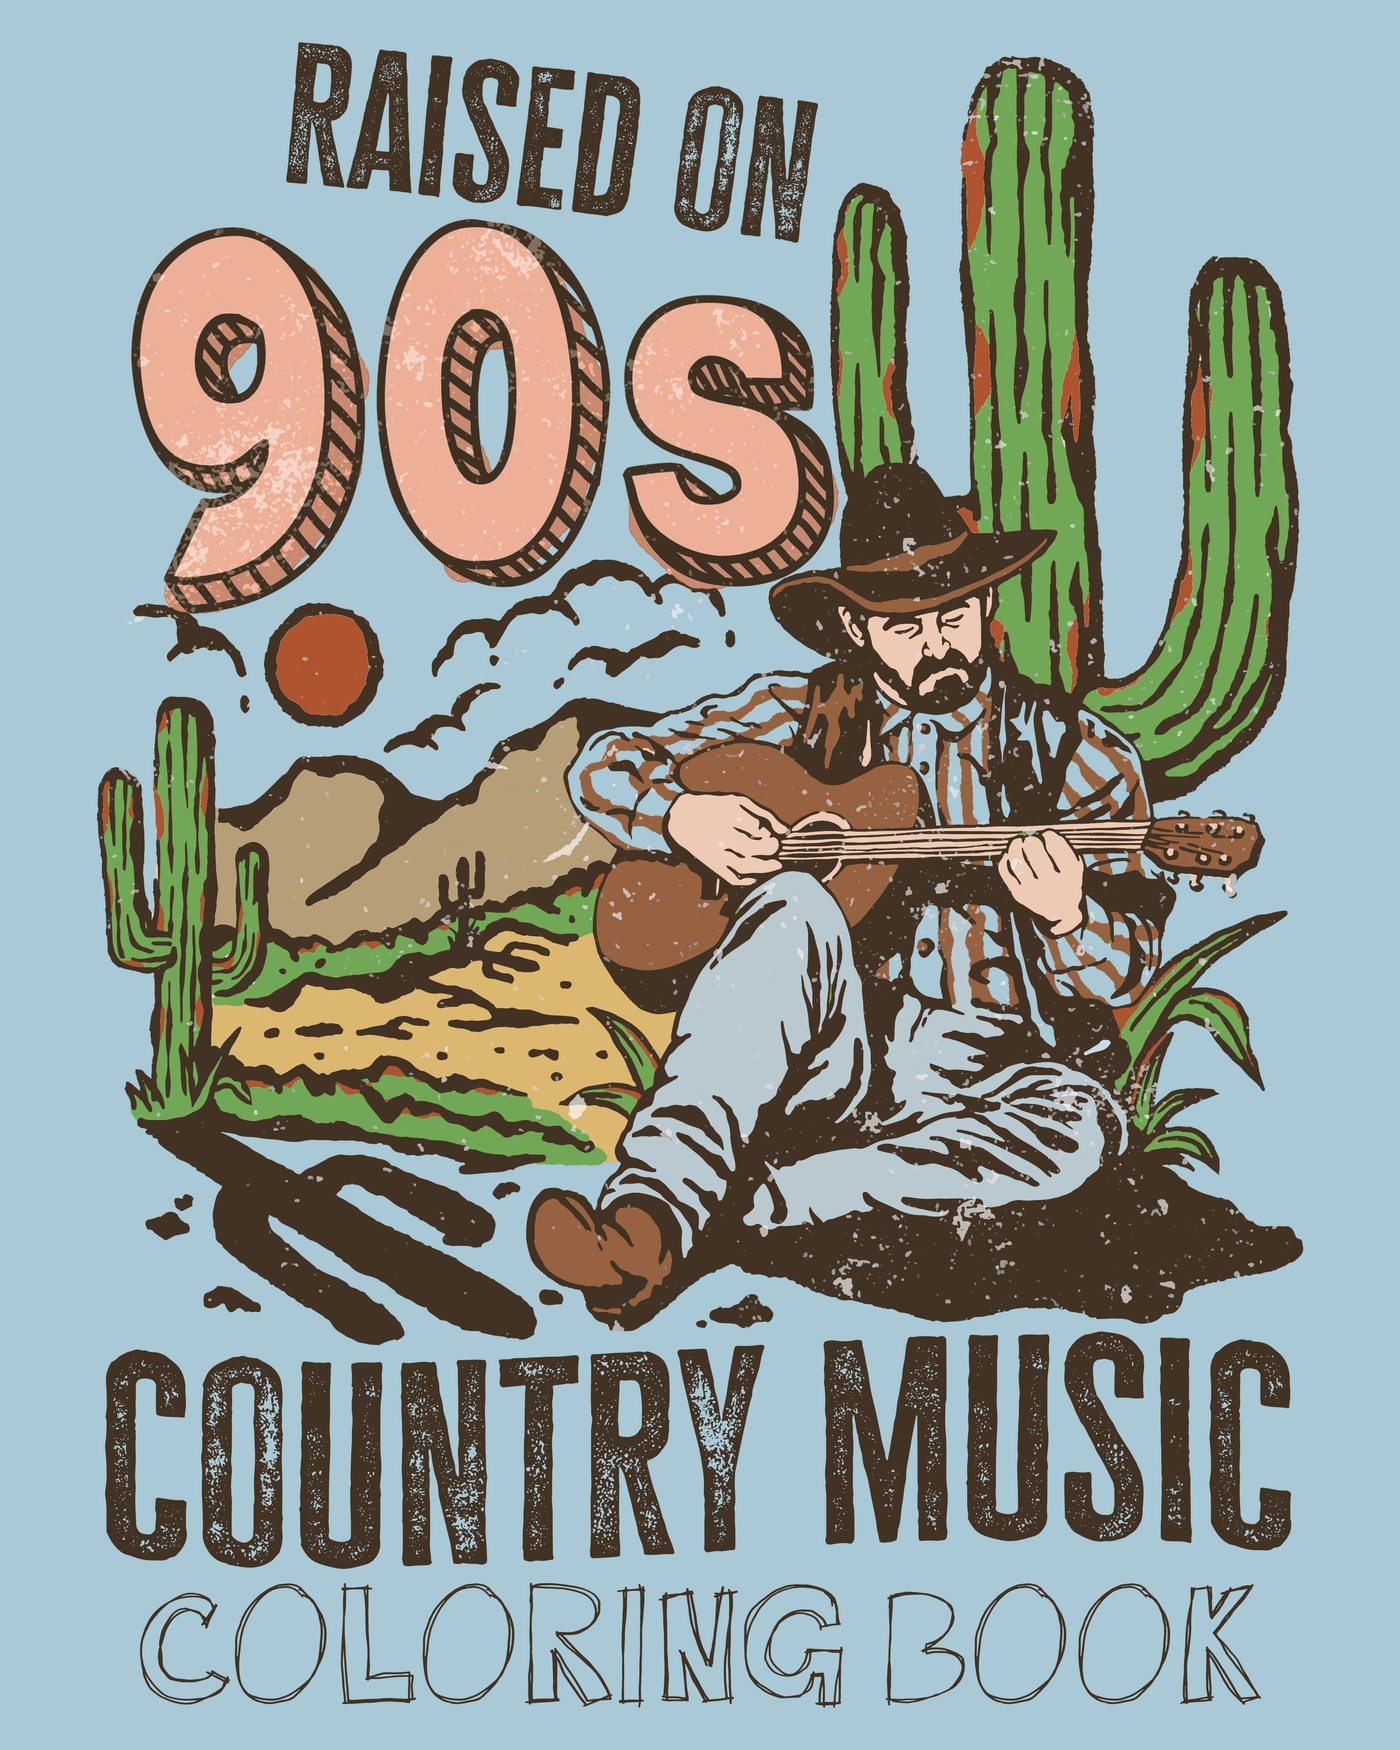 90’s Country Coloring Books - Restock Pre Order - ships in 30 days